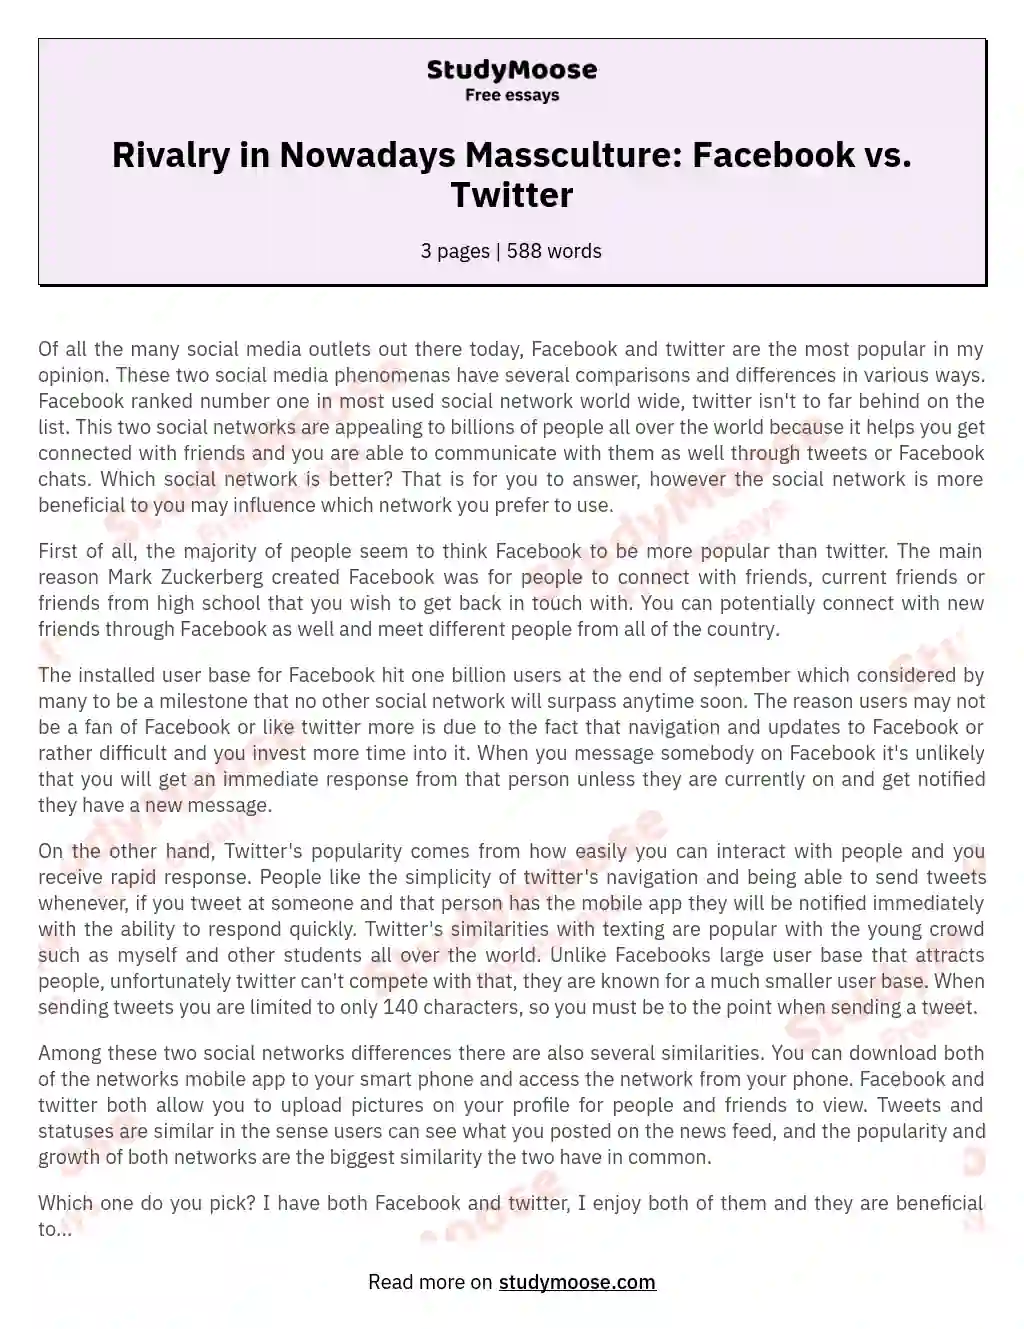 Rivalry in Nowadays Massculture: Facebook vs. Twitter